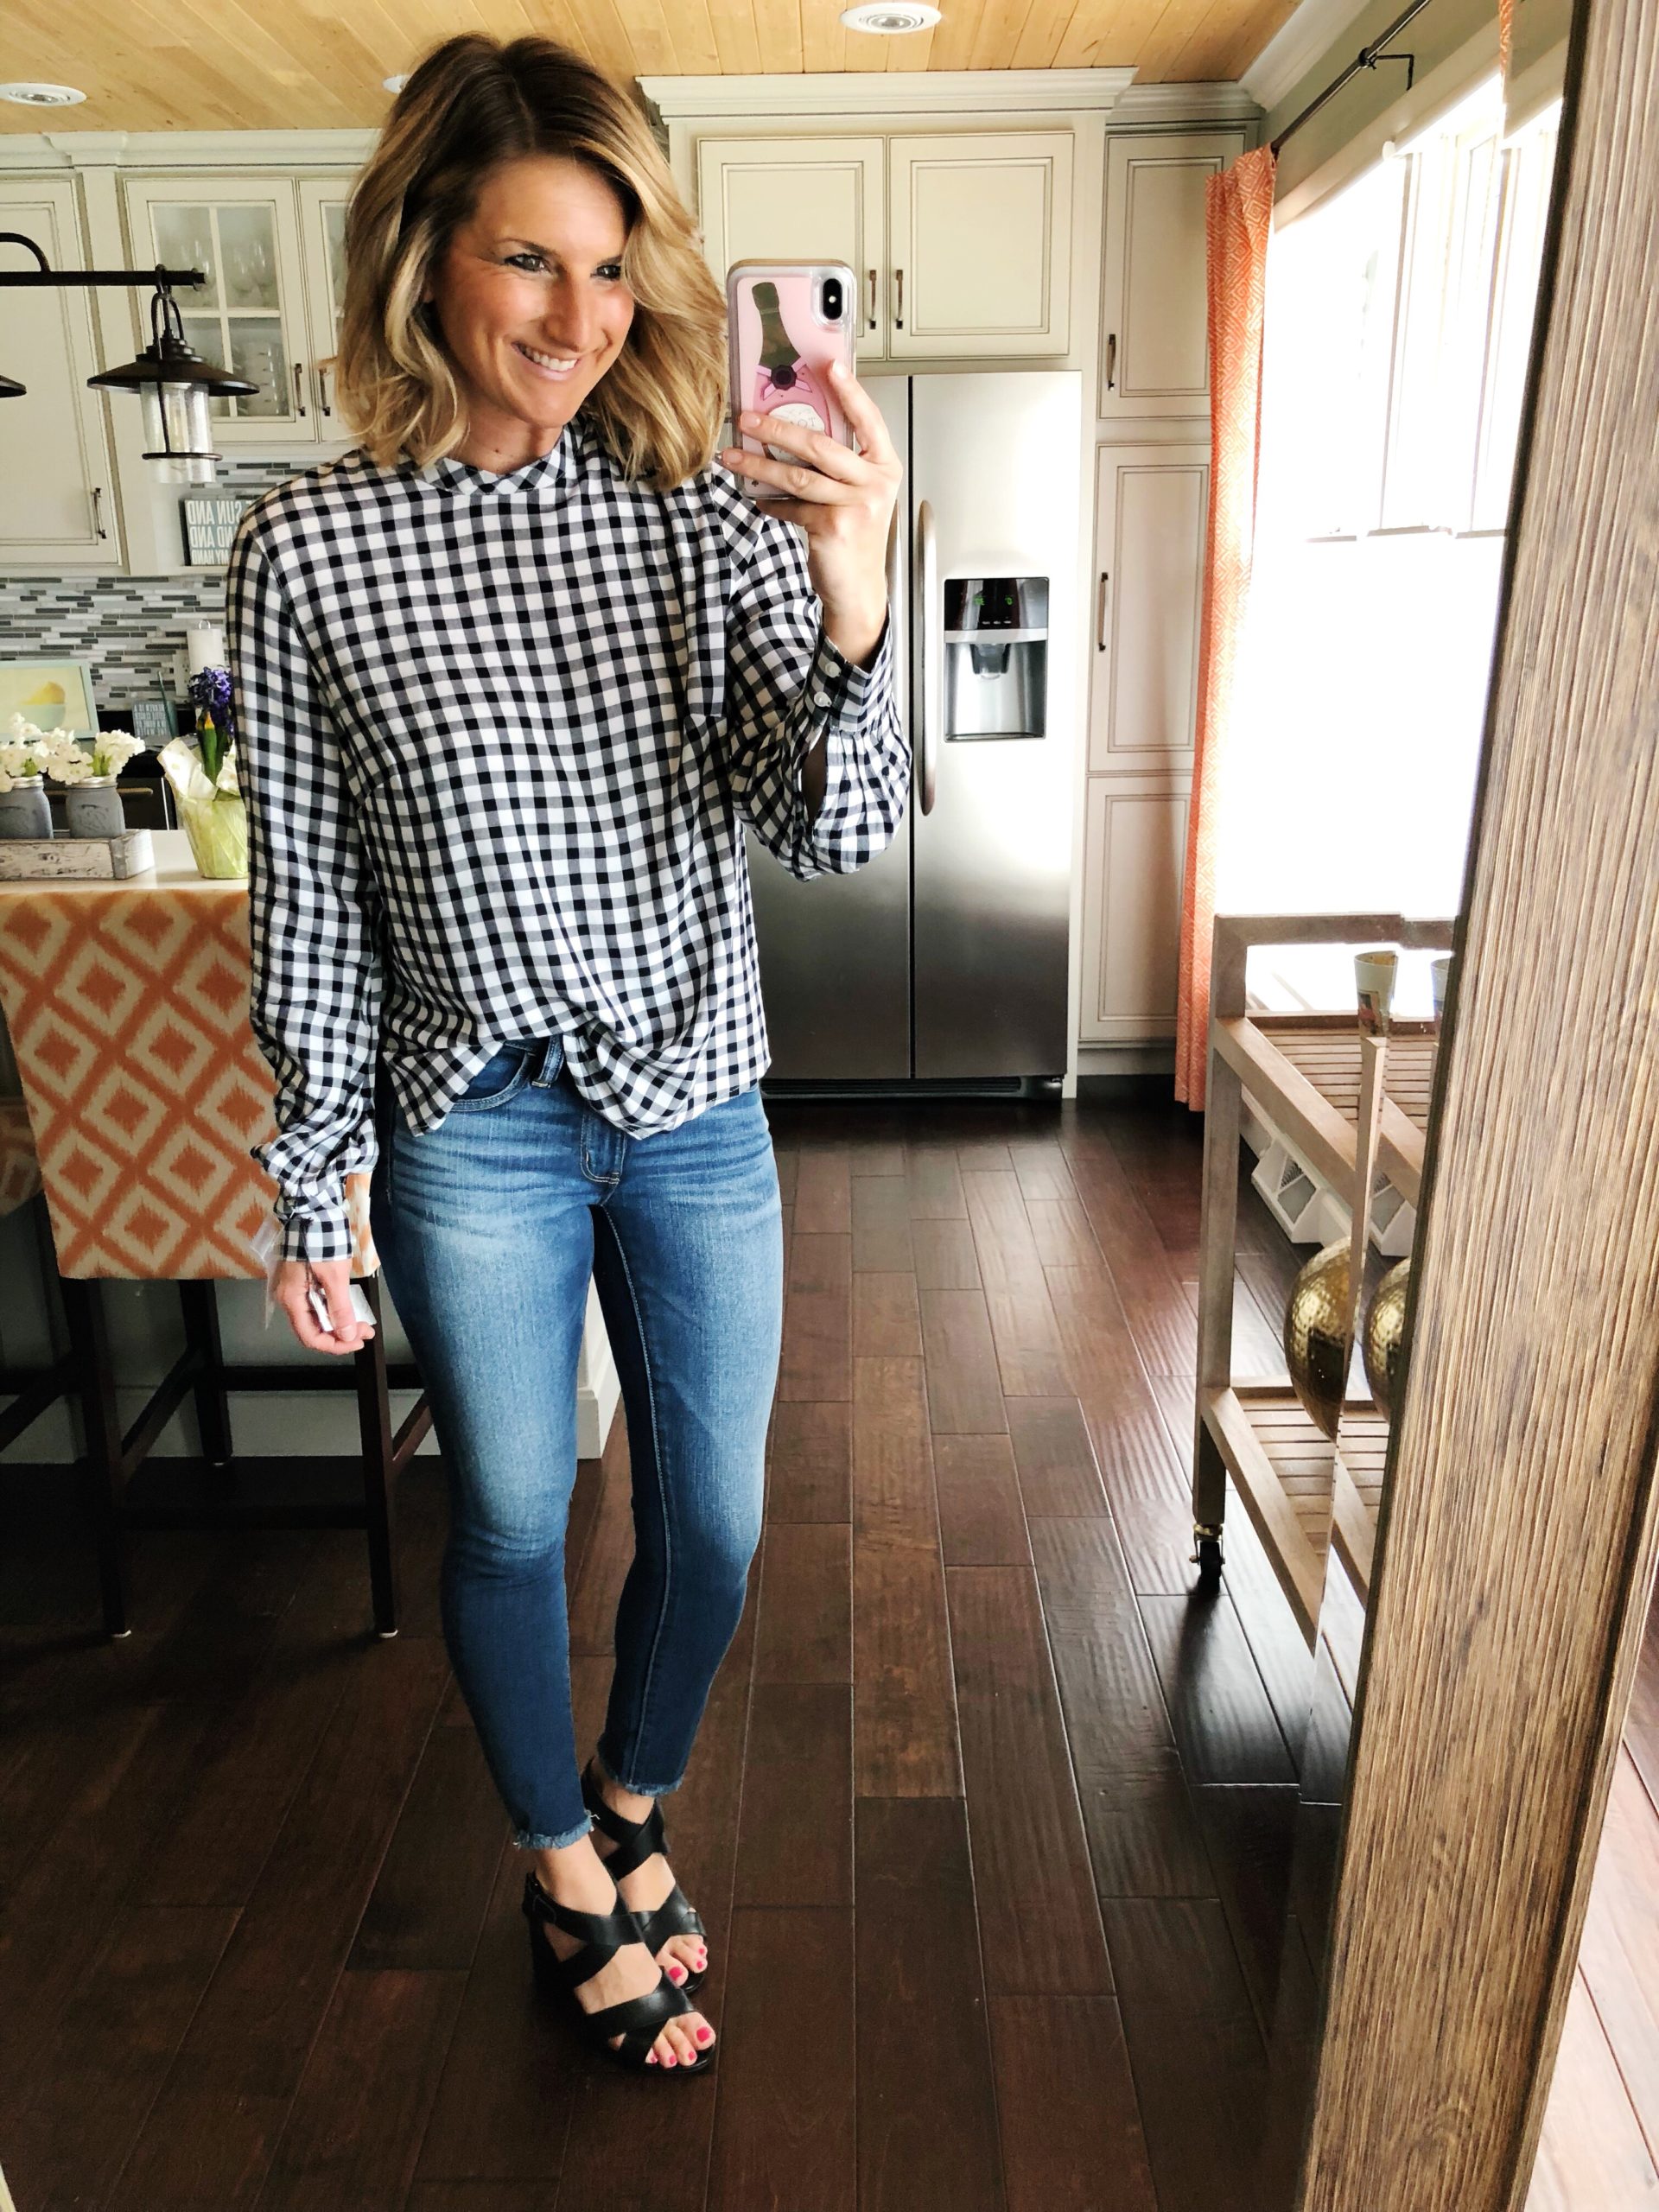 Spring Fashion // How to Wear a Gingham Top // Gingham Top + Cropped Jeggings + Block Heel Sandals